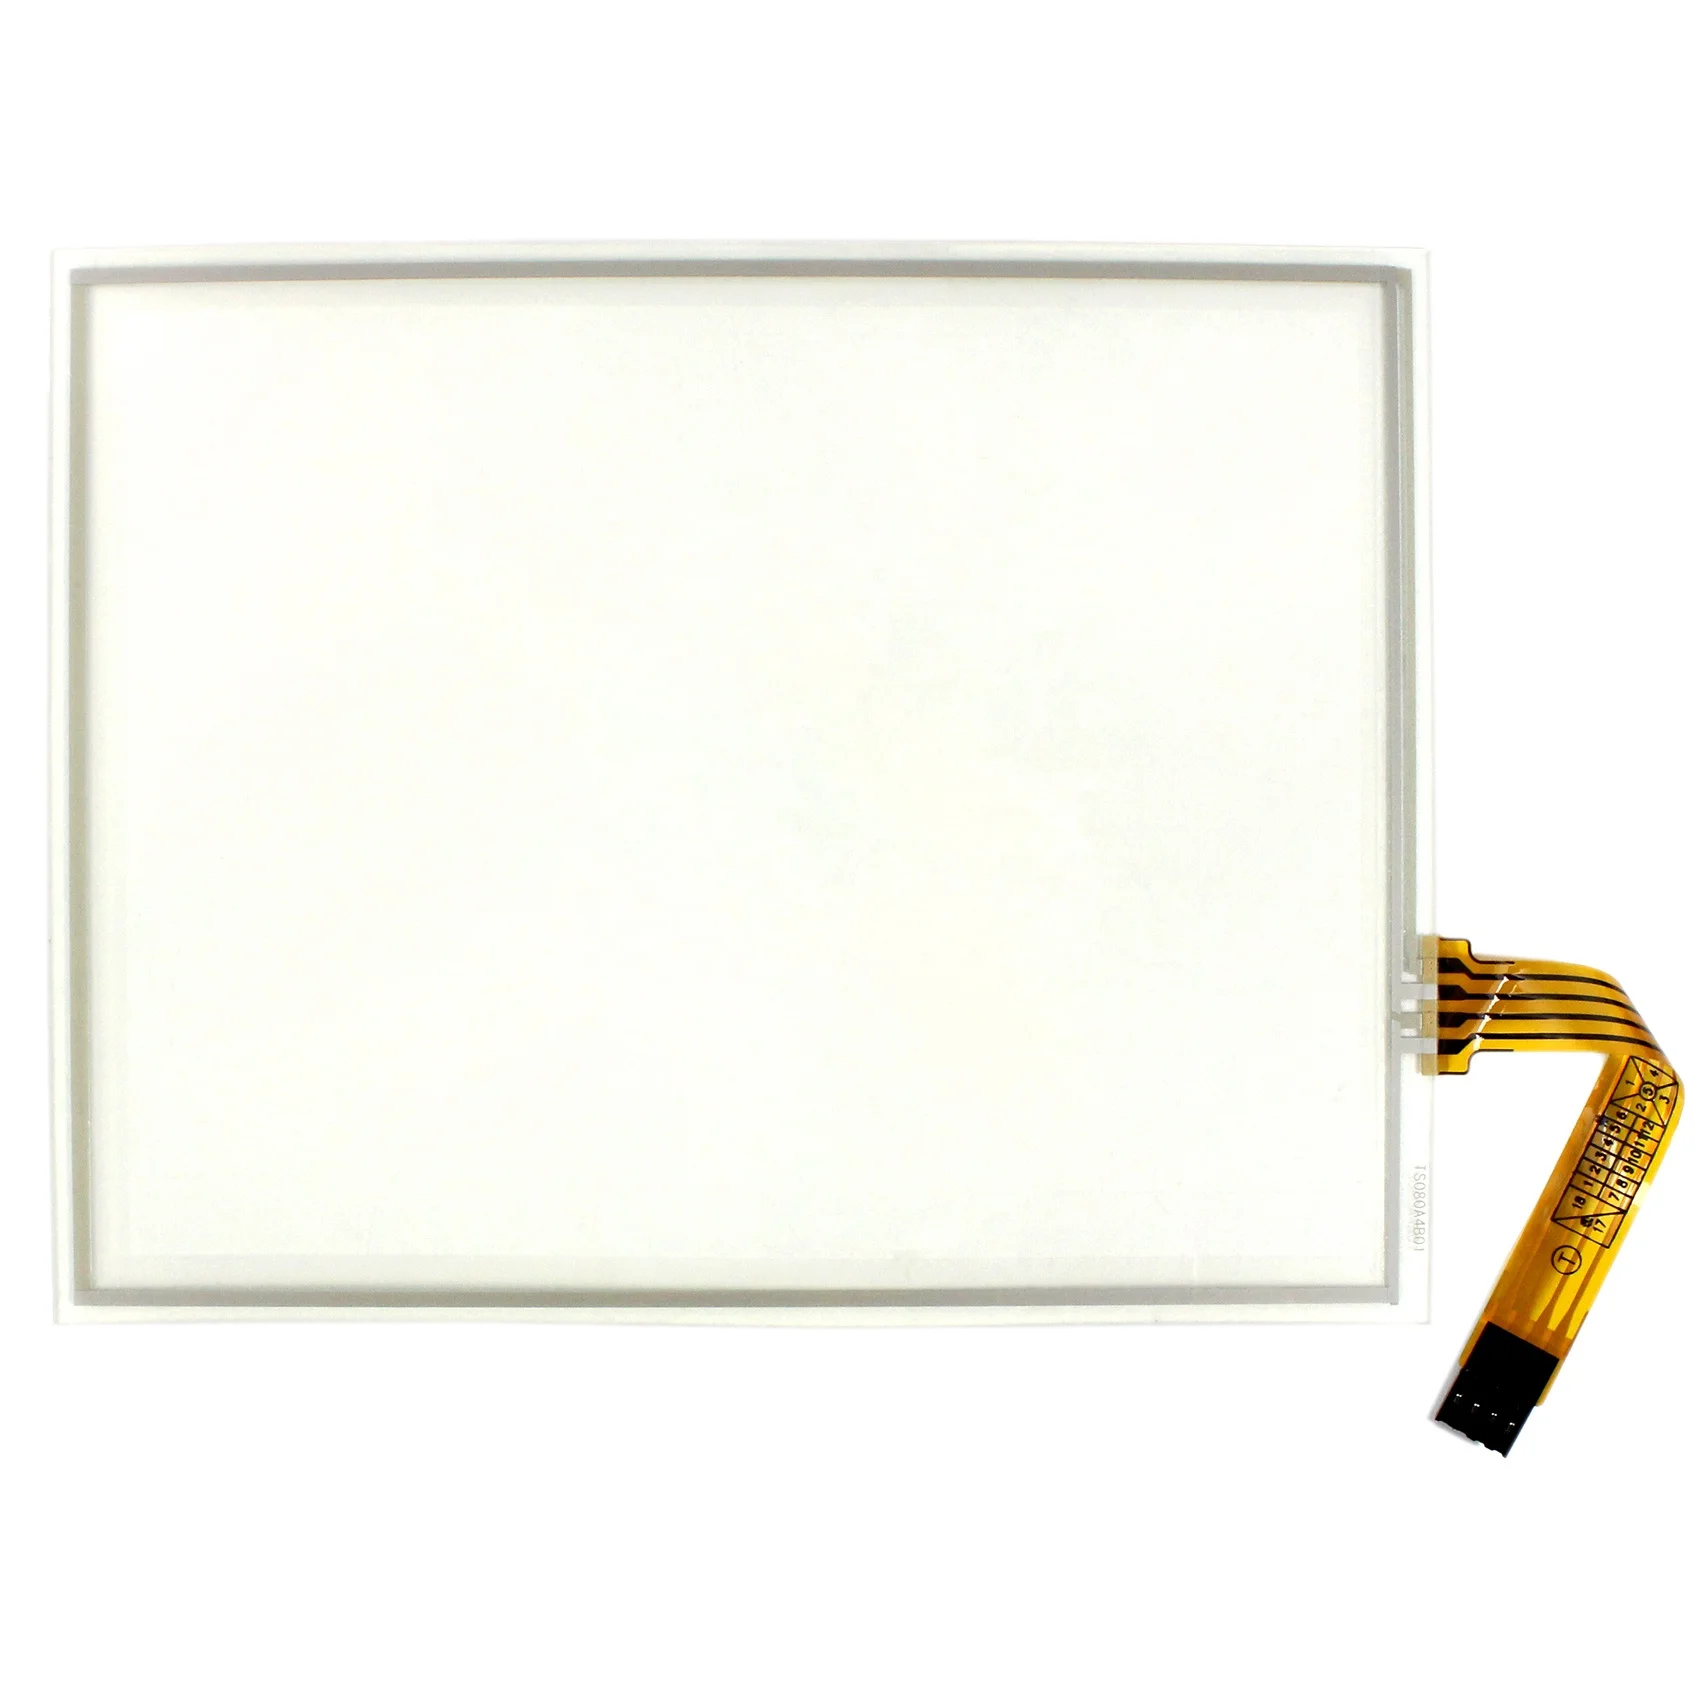 

Touch Screen 4 wire resistive touch panel for 8inch 800x600 tft lcd module VS080TP-A2